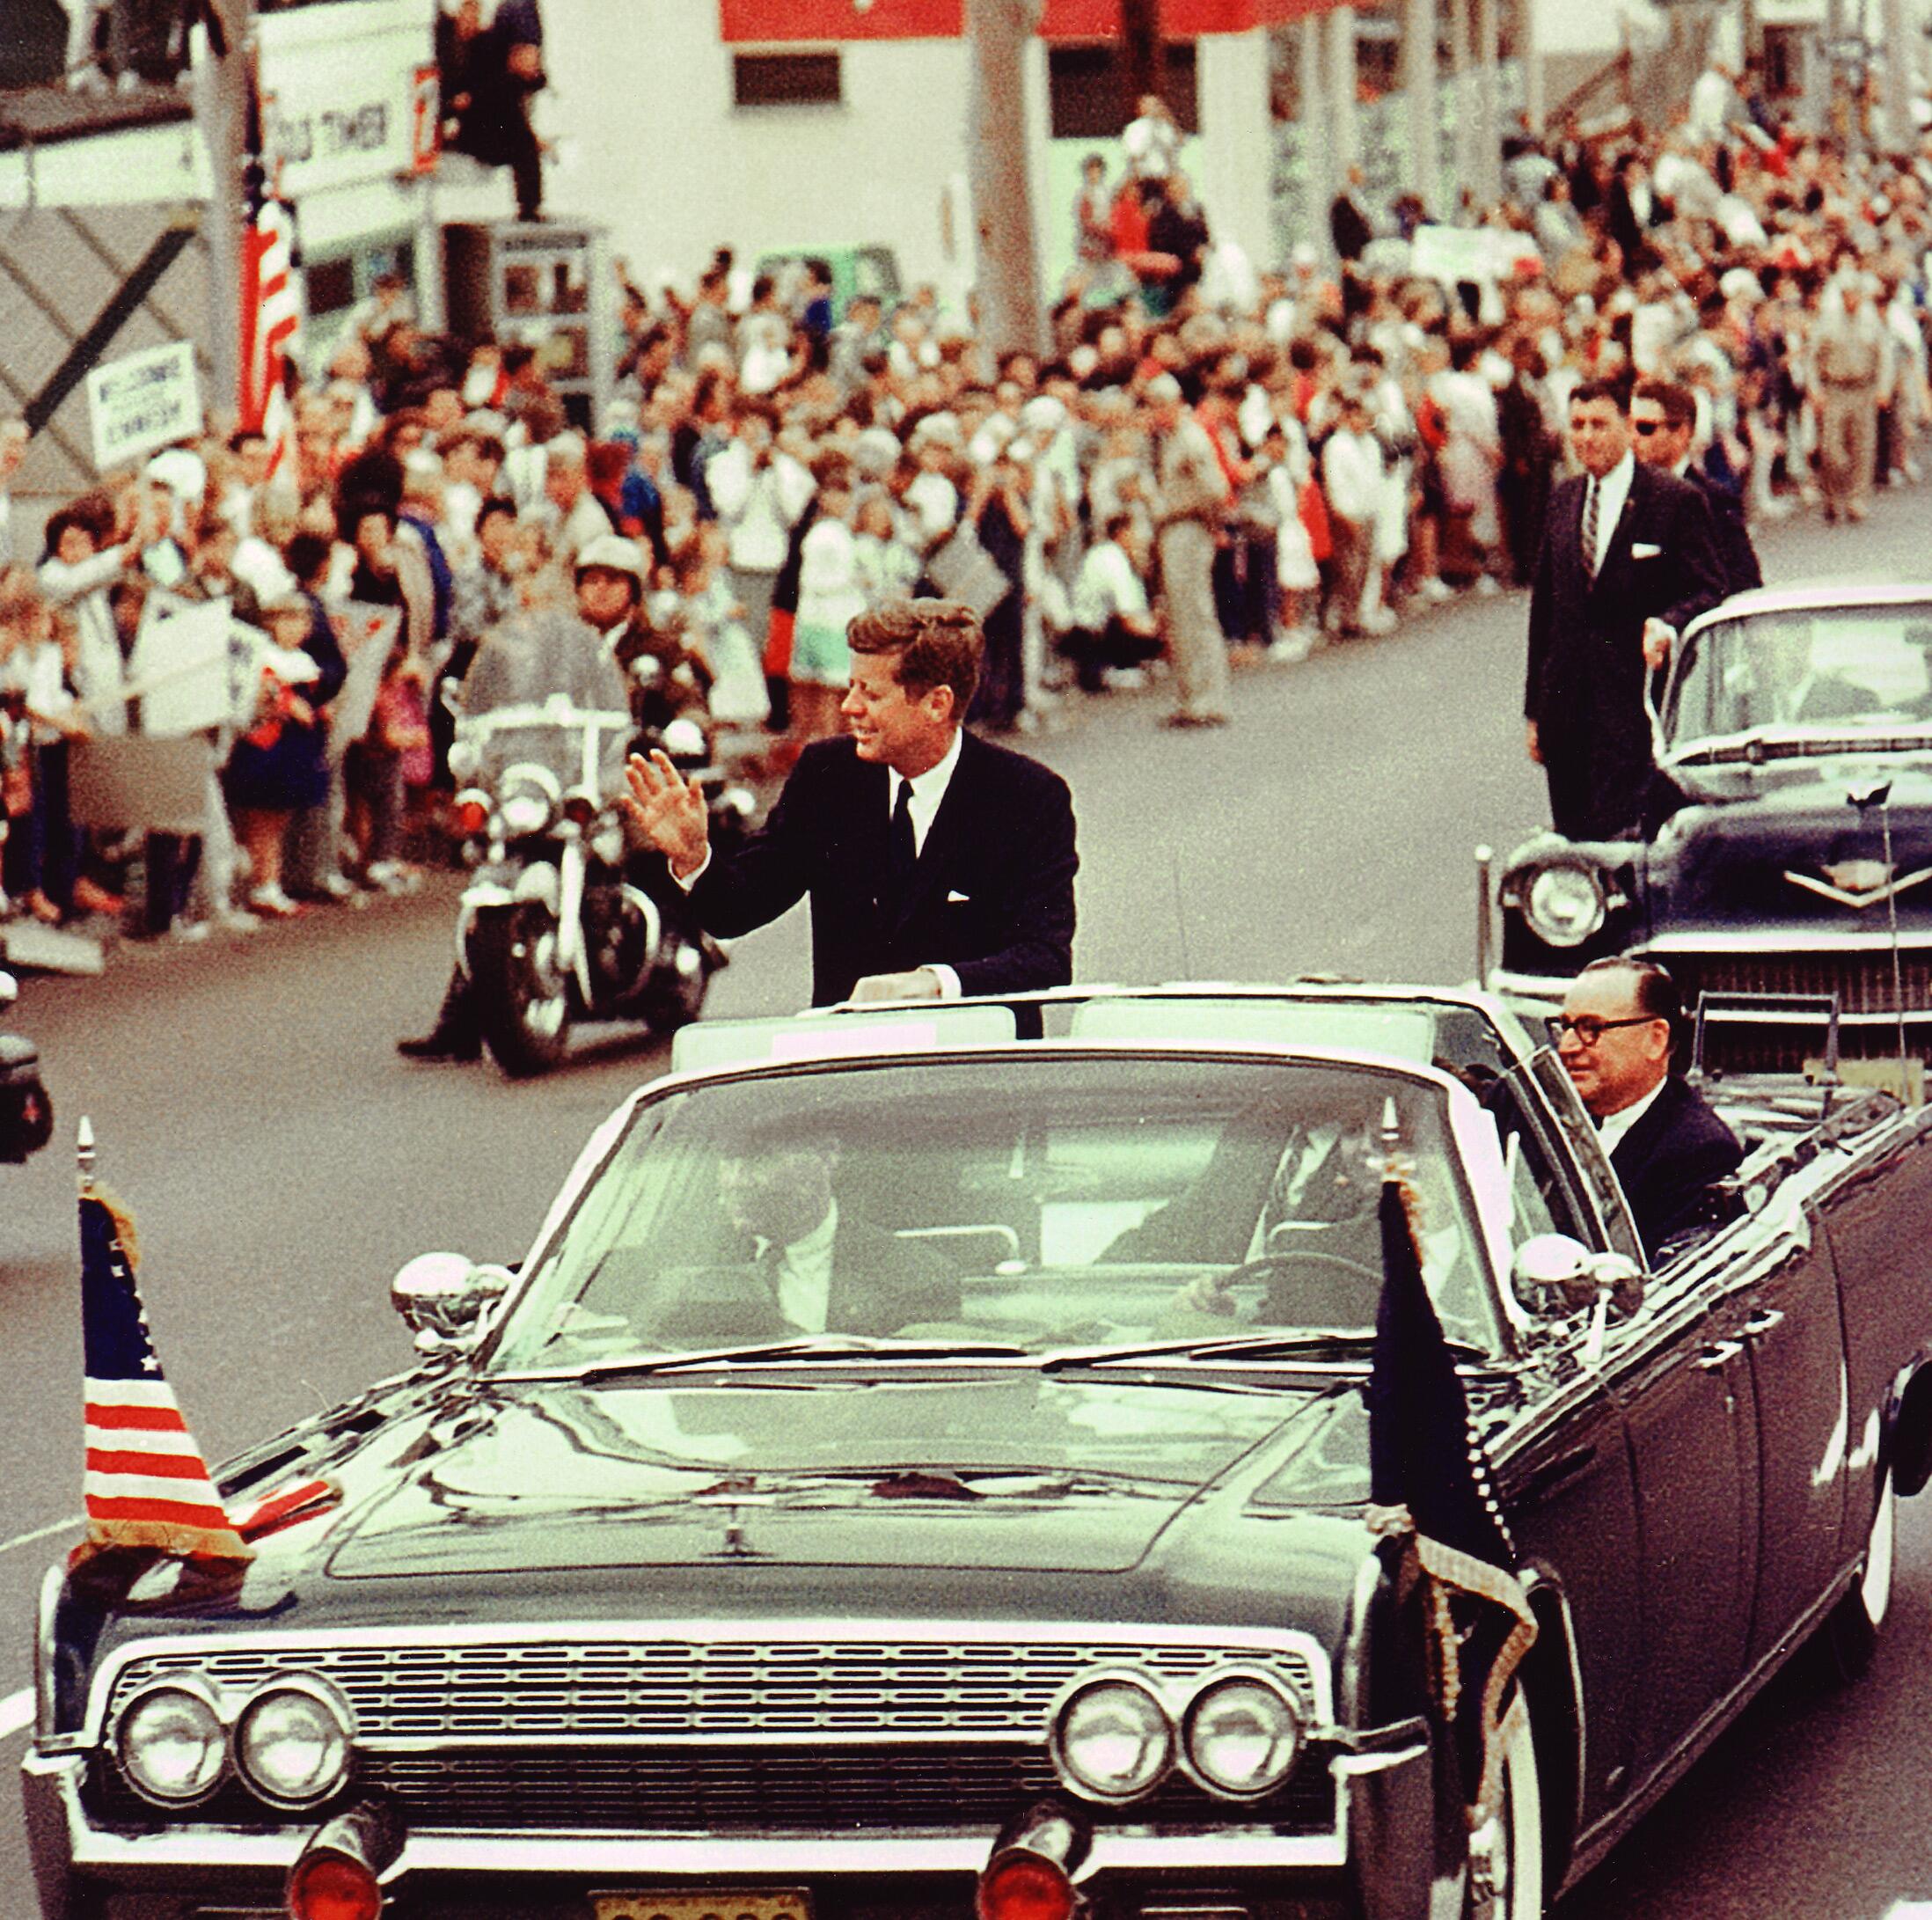 President John F. Kennedy traveled in his 1961 Lincoln Continental Limousine during a visit to San Diego, California on June 6, 1963. The limousine included a series of removable steel and transparent plastic roof panels that could be installed in various combinations. It also contained a hydraulically operated seat, which could be raised 10 ½ inches to give the gathered crowds a better view of President Kennedy and his fellow passengers. After President Kennedy's assassination in 1963, the entire vehicle was armored and returned to the Secret Service in May 1964. The finished product weighed about one ton more than the original weight of 7,800 pounds.